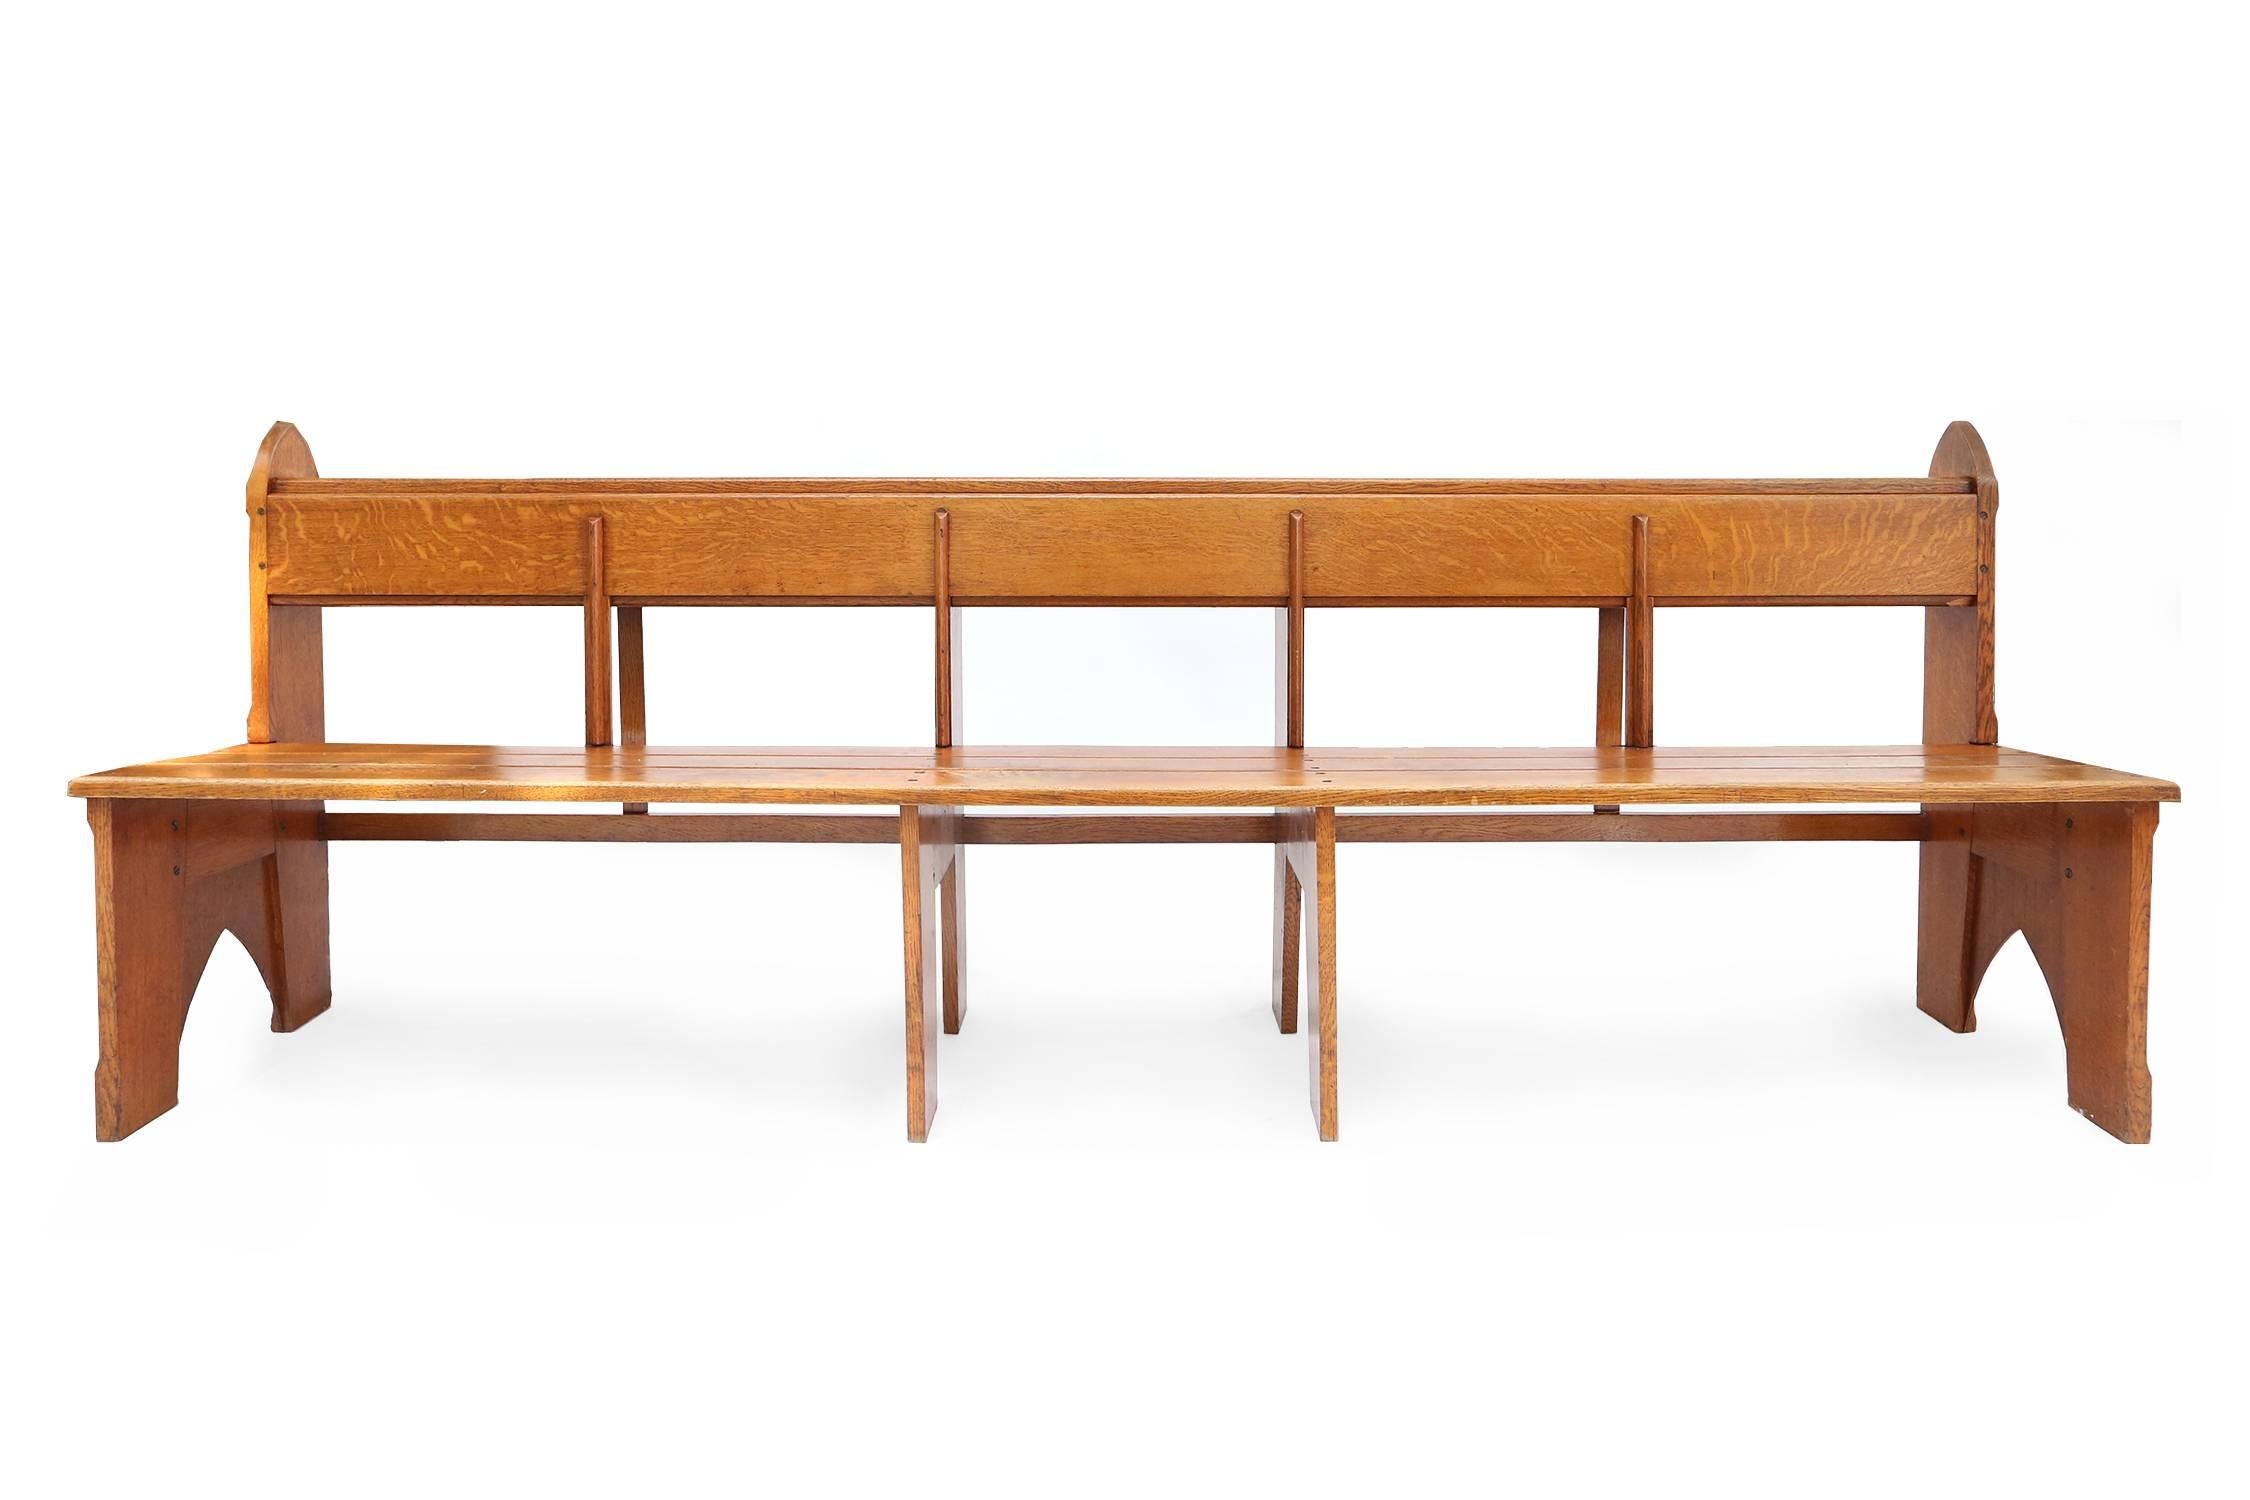 Art Deco Amsterdam school style benches no 2.
Solid oak.
Netherlands, 1920s.
L 256 cm H 92 cm D 46 cm.
Check out our Goldwood Storefront for more matching pieces.